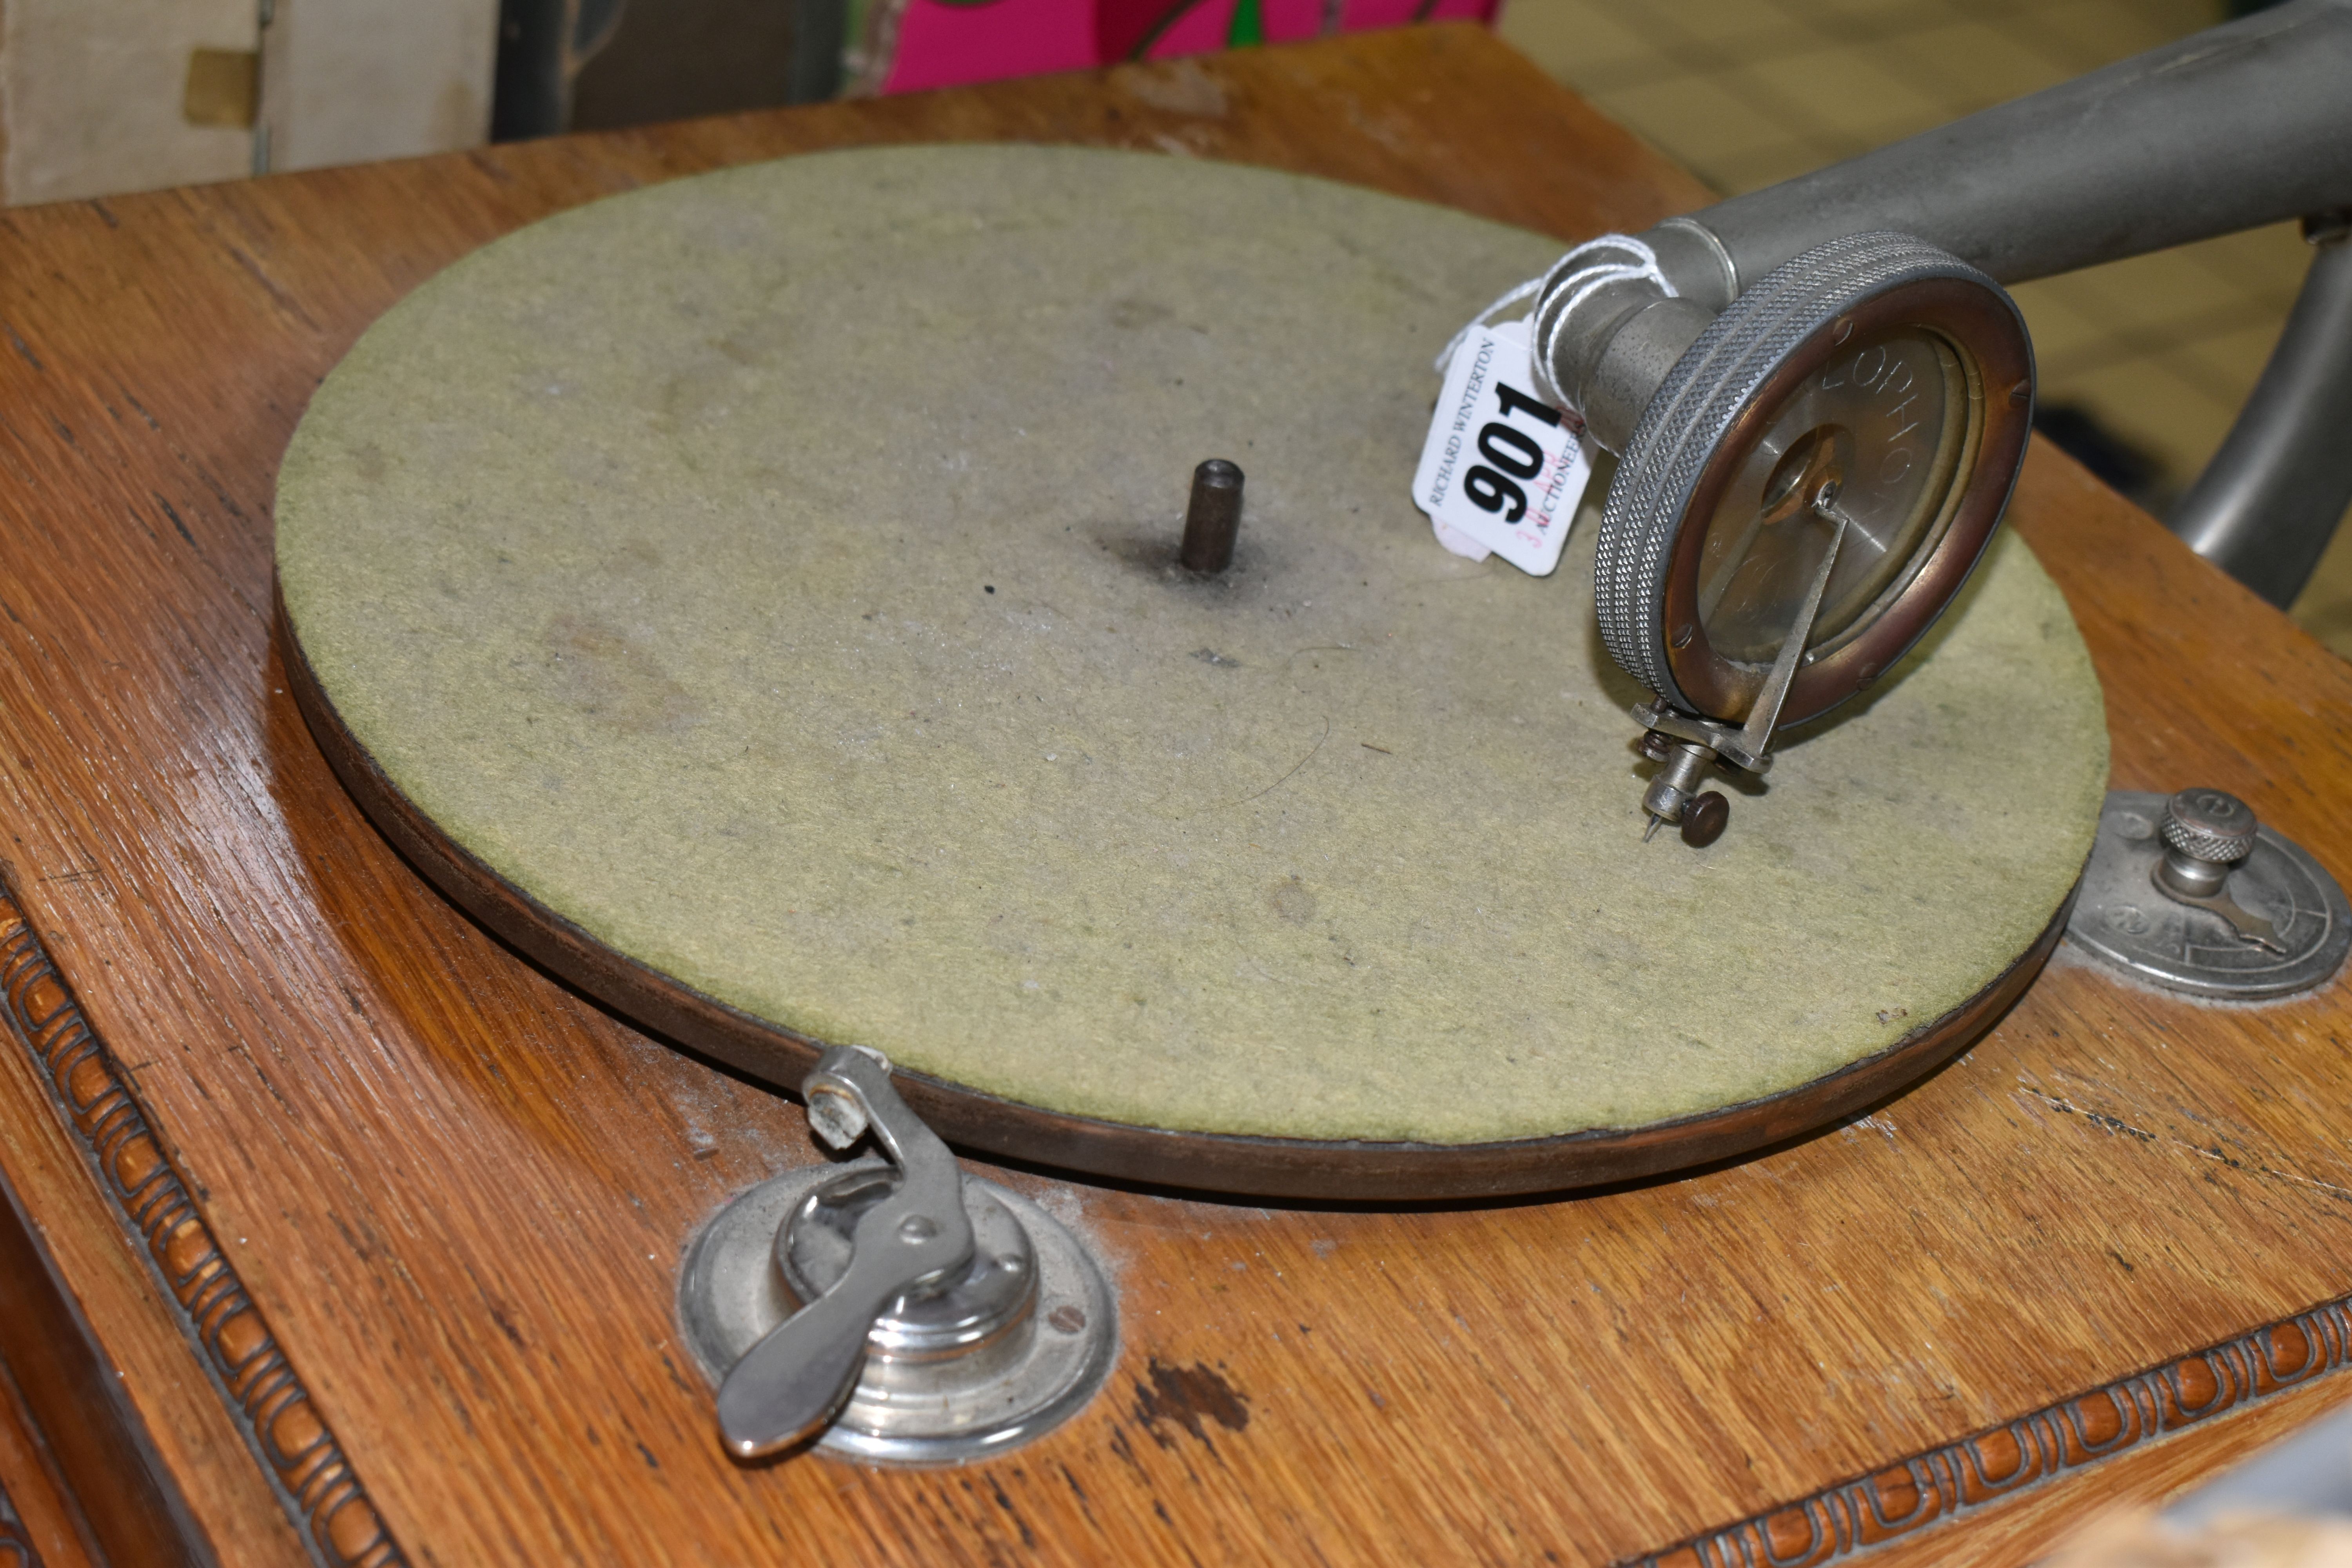 AN EARLY 20TH CENTURY PALE OAK PARLOPHONE TABLE TOP GRAMOPHONE, with moulded edges and on splayed - Image 5 of 10